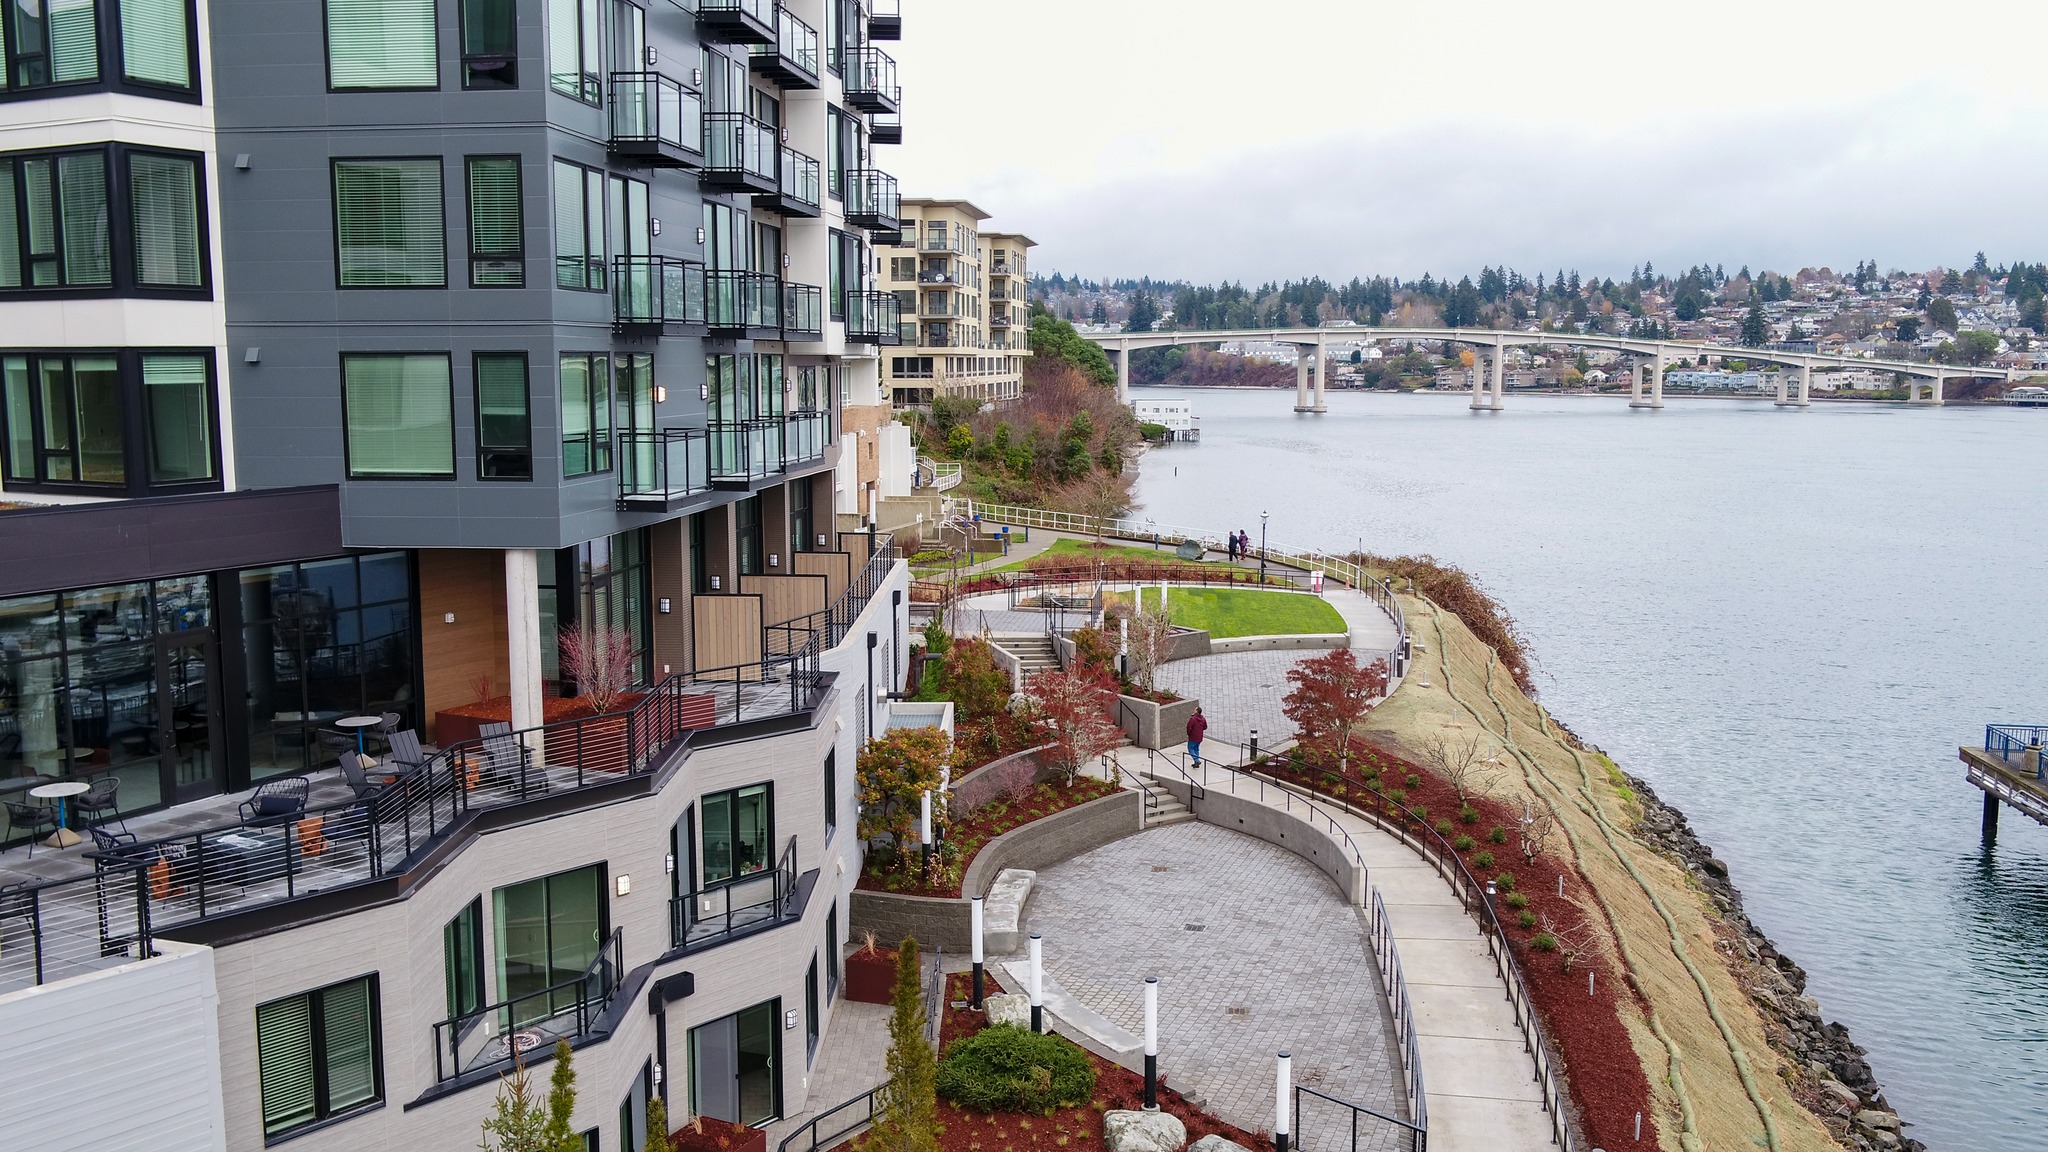 Kitsap County and Marina Square: Close to the Waterfront. Open to a vibrant quality of life. Photo